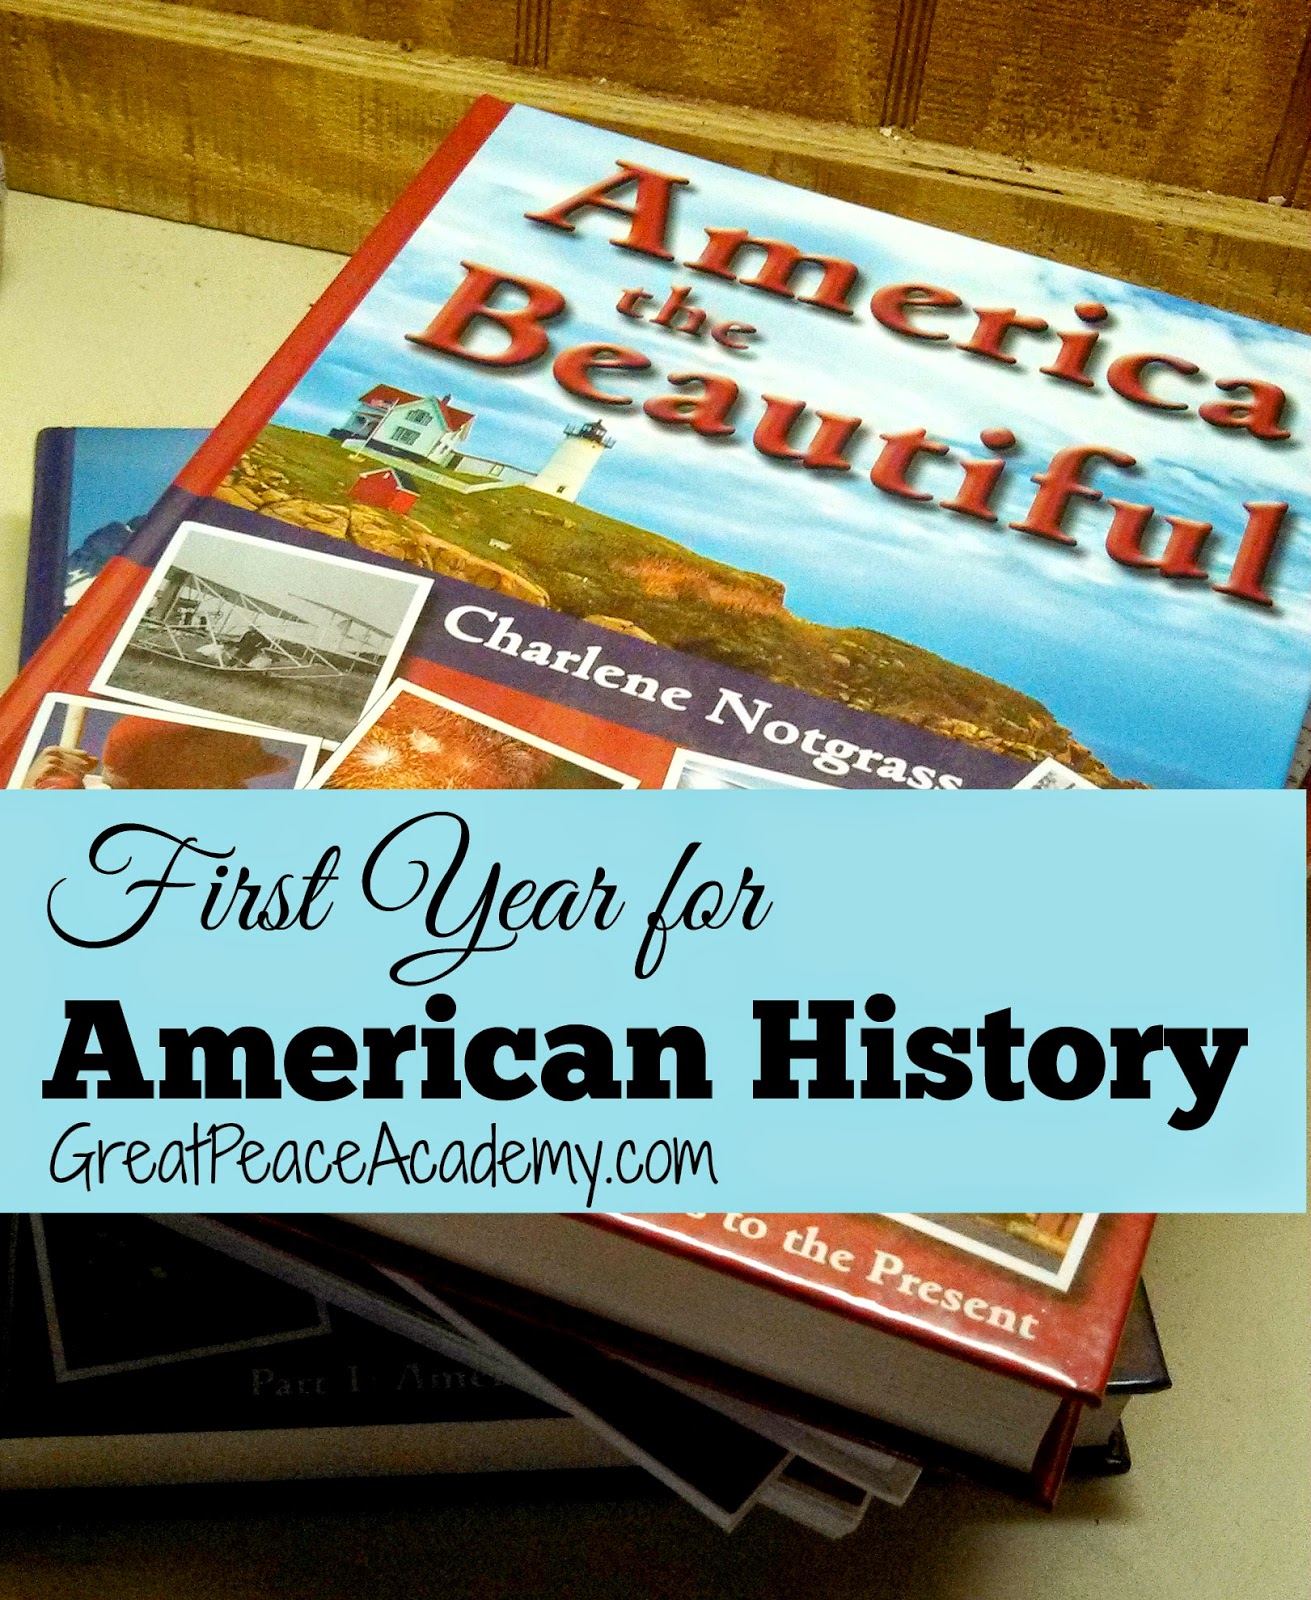 American History with Notgrass History at Great Peace Academy